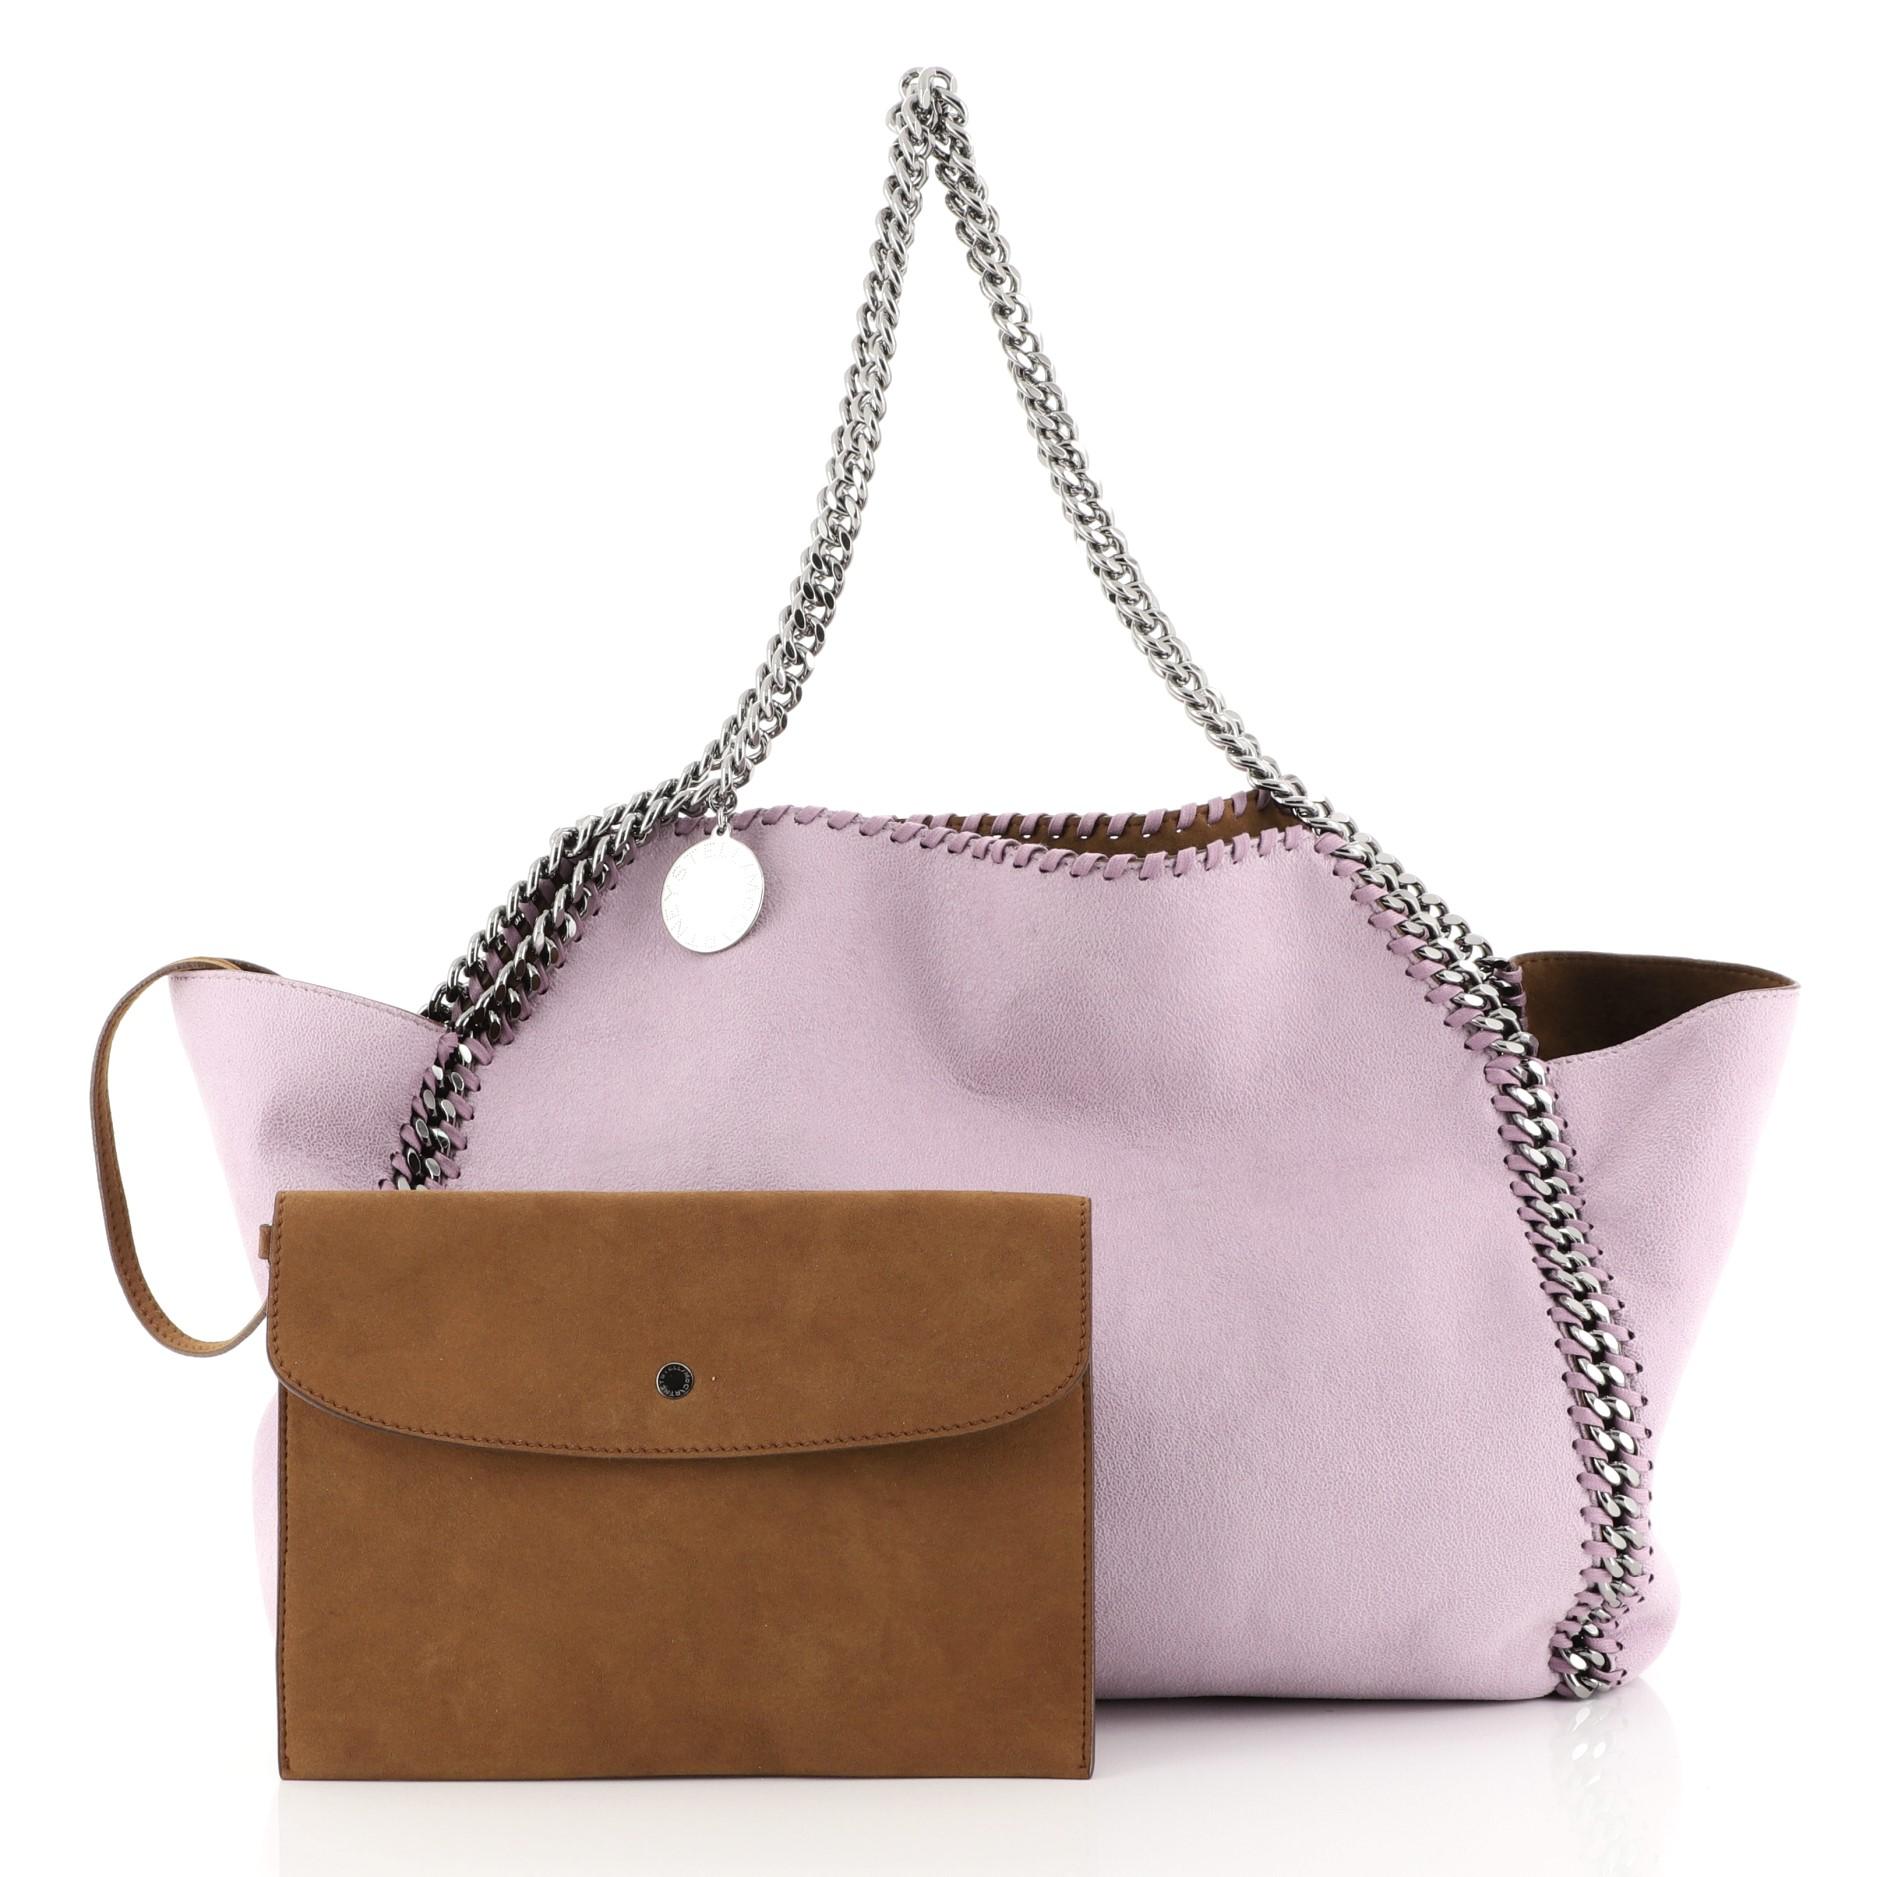 This Stella McCartney Falabella Reversible Tote Shaggy Deer Small, crafted in purple shaggy deer, features chain link strap and trim, whipstitched edges, and gunmetal-tone hardware. It opens to a brown suede interior. 

Estimated Retail Price: